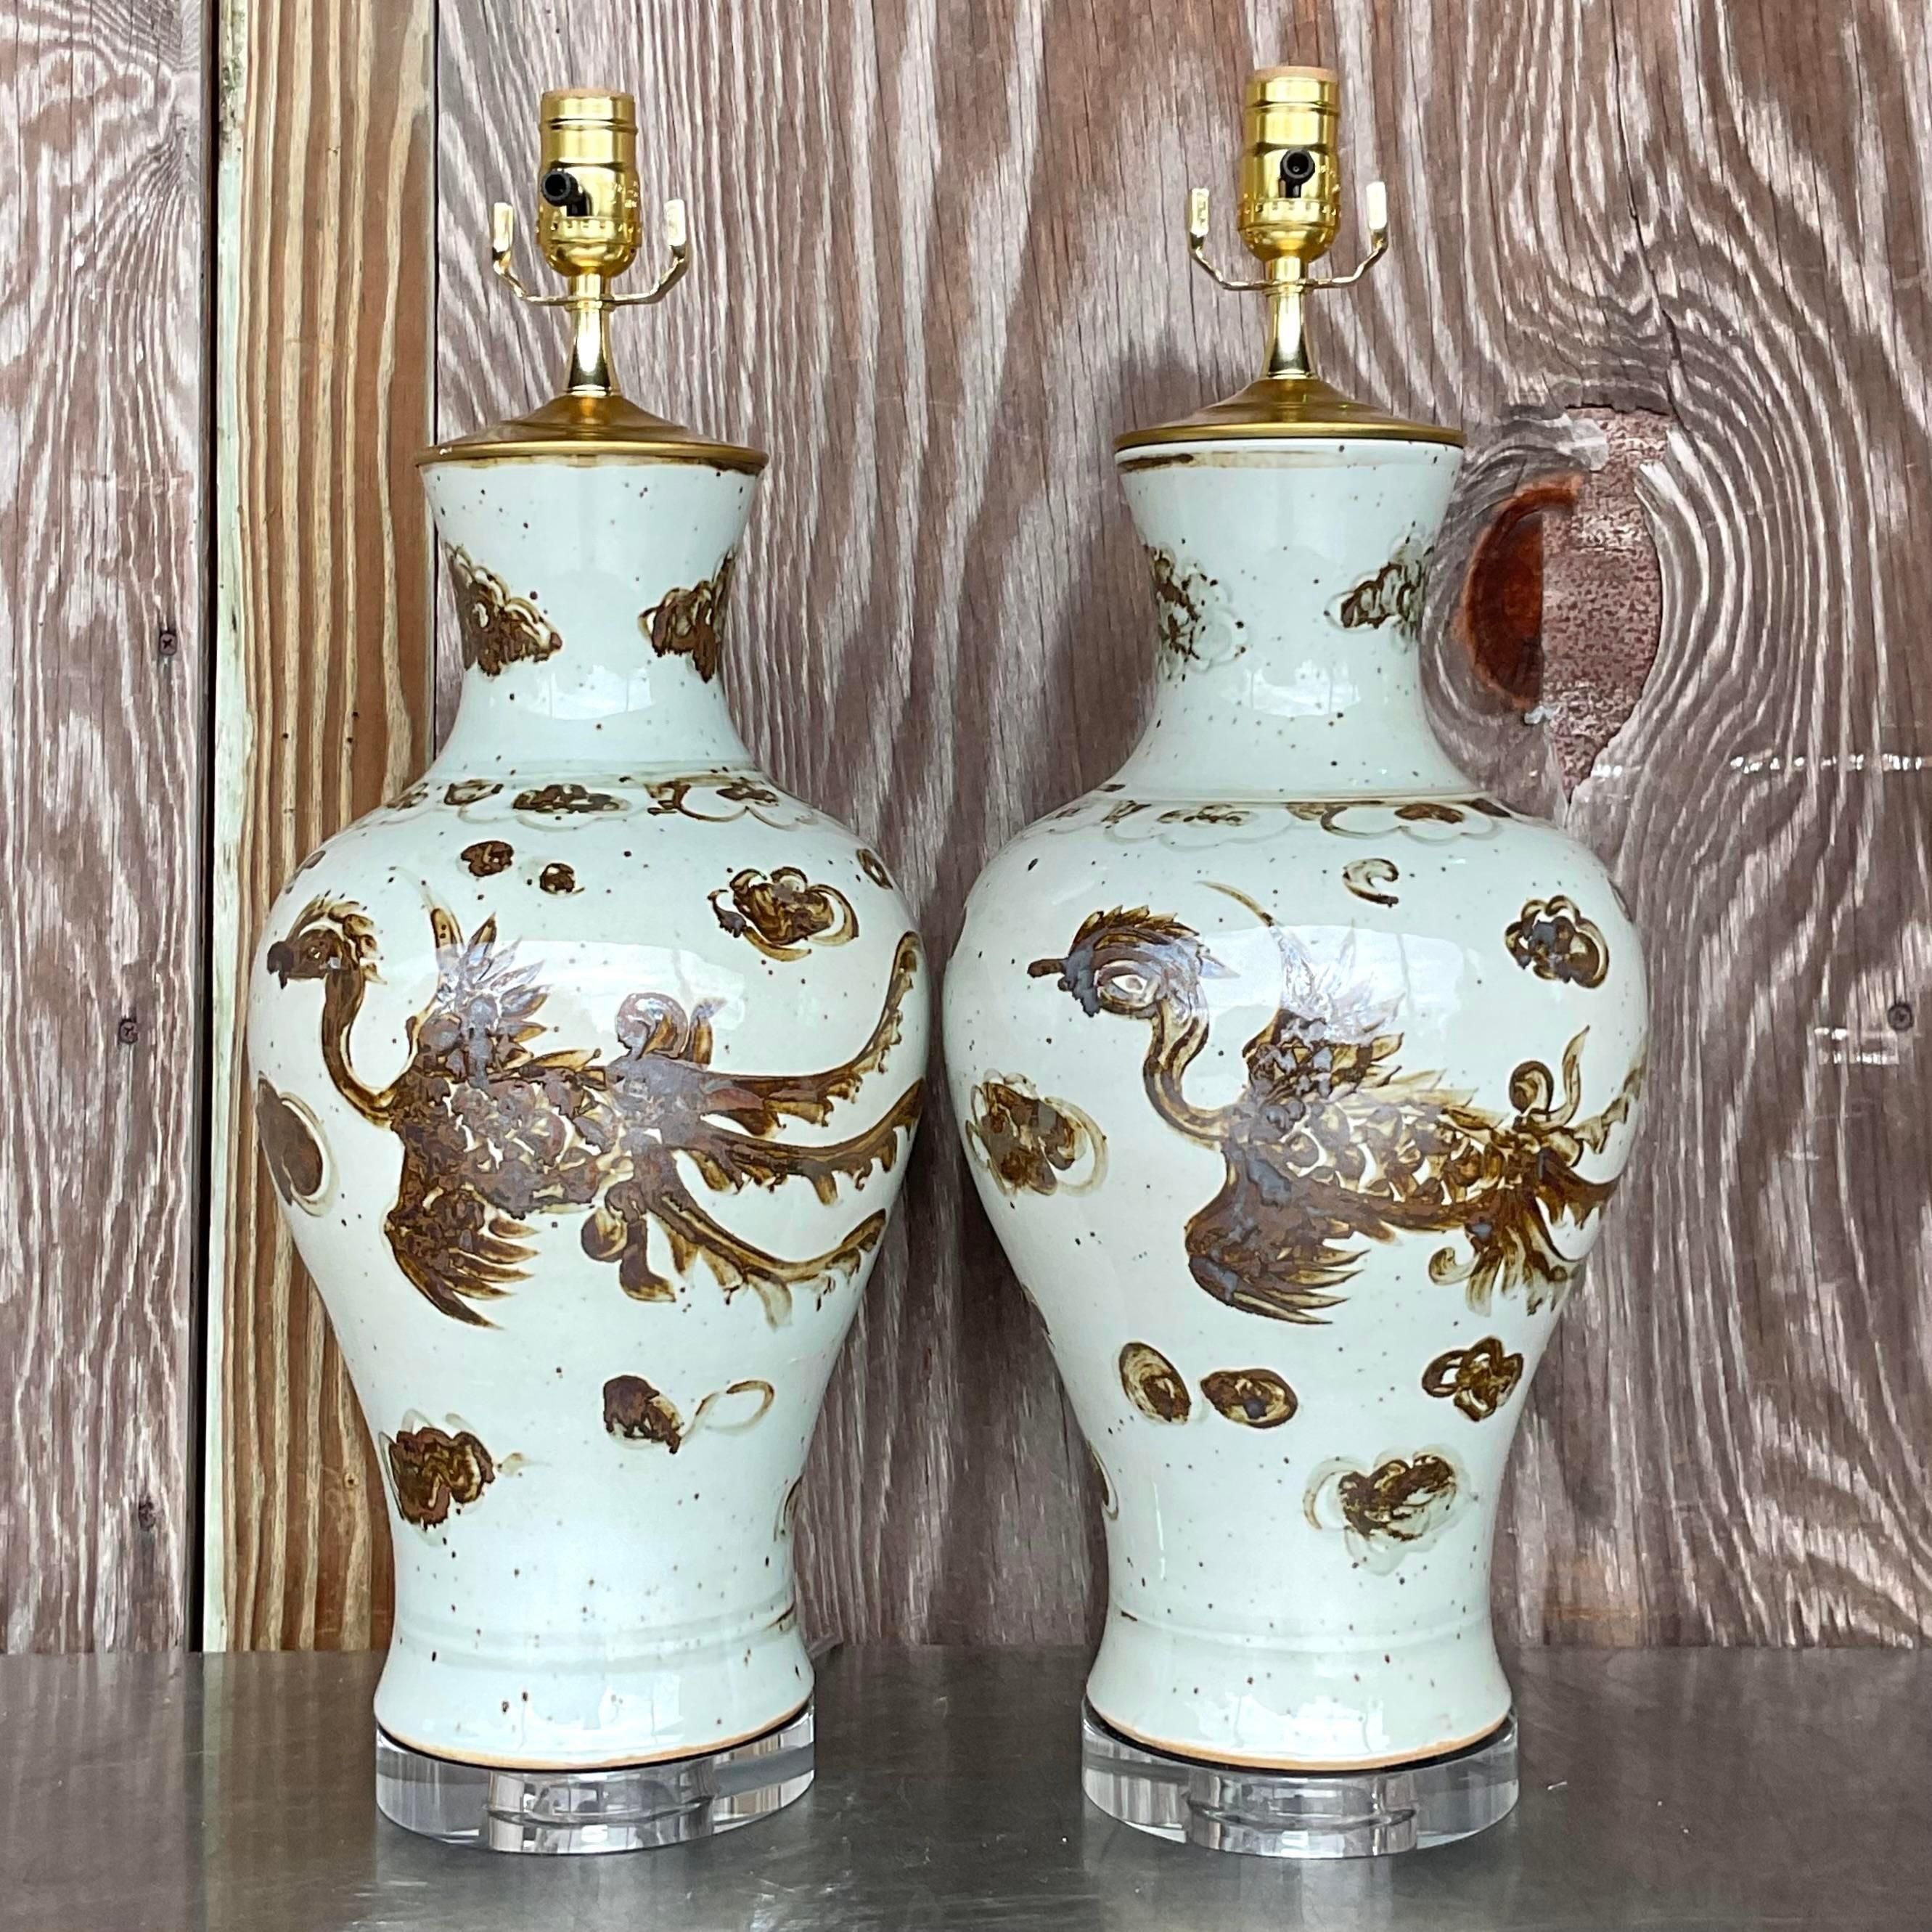 A stunning pair of vintage Boho table lamps. A chic Phoenix design on a glazed heavy ceramic vase. Monumental in size and drama. Acquired from a Palm Beach estate.